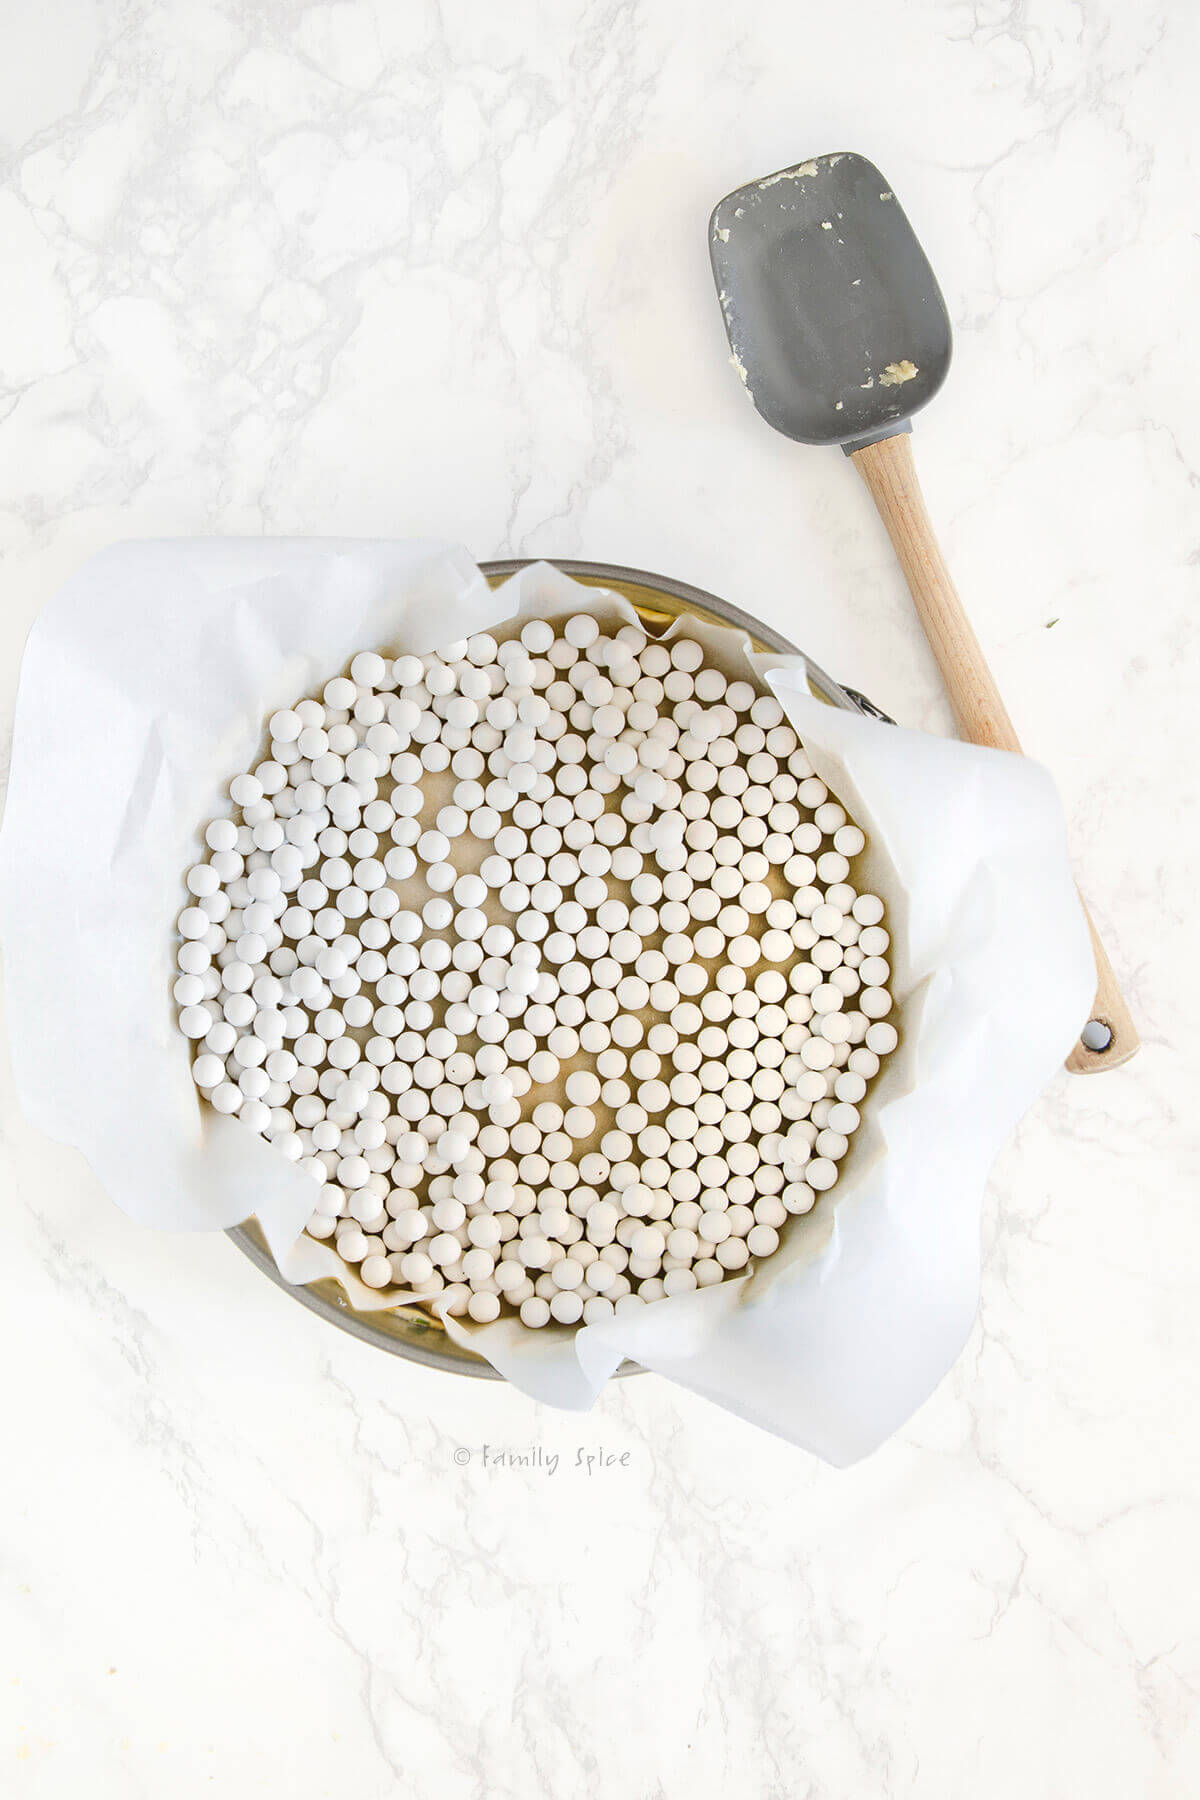 Pie crust pressed into a springform pan with parchment paper and pie weights over it